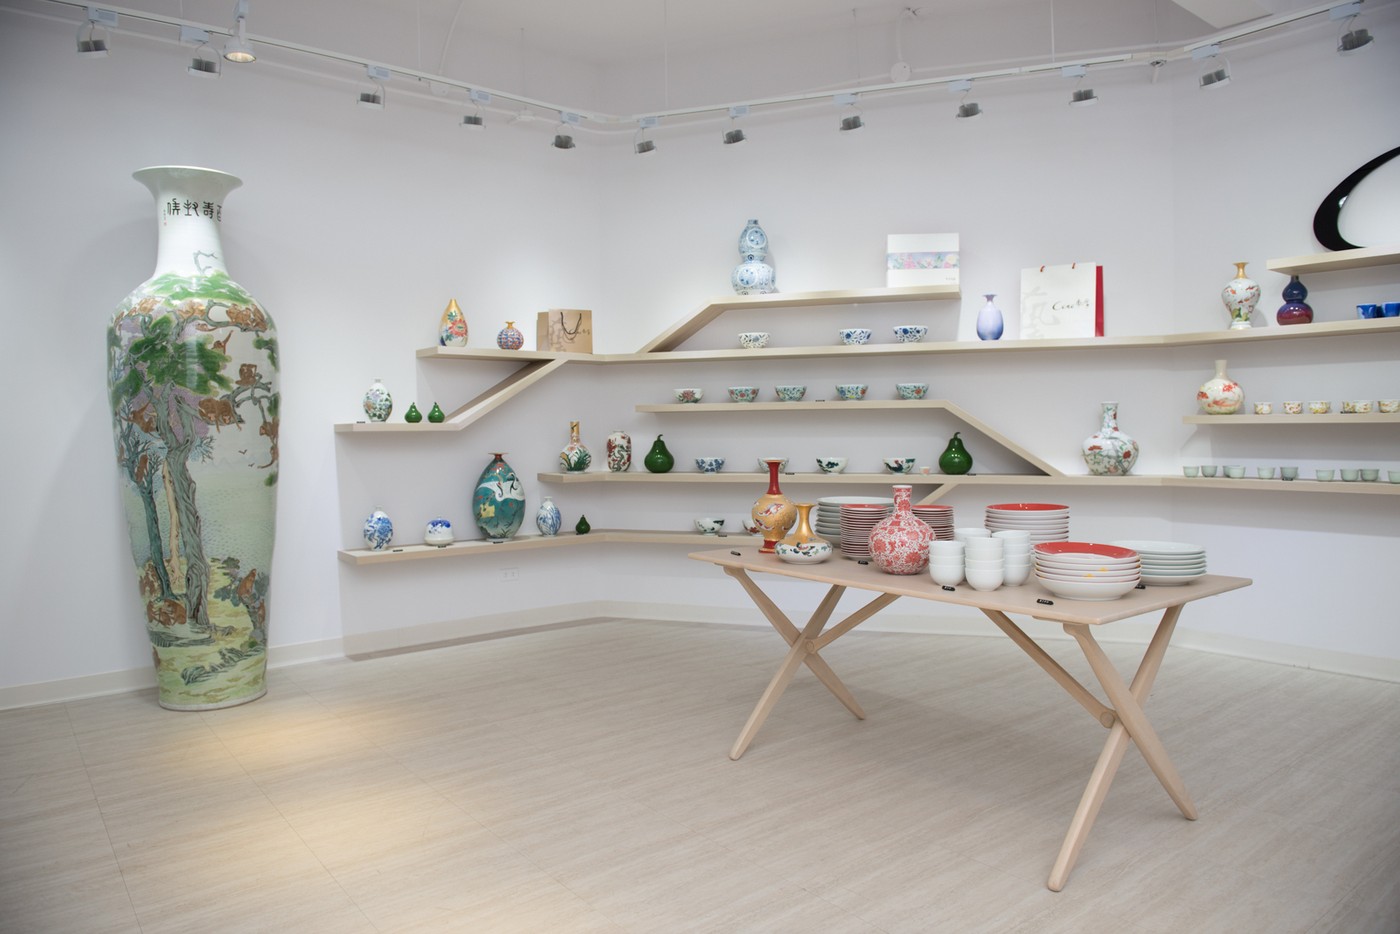 Observing the dissemination and evolution of ceramic crafts